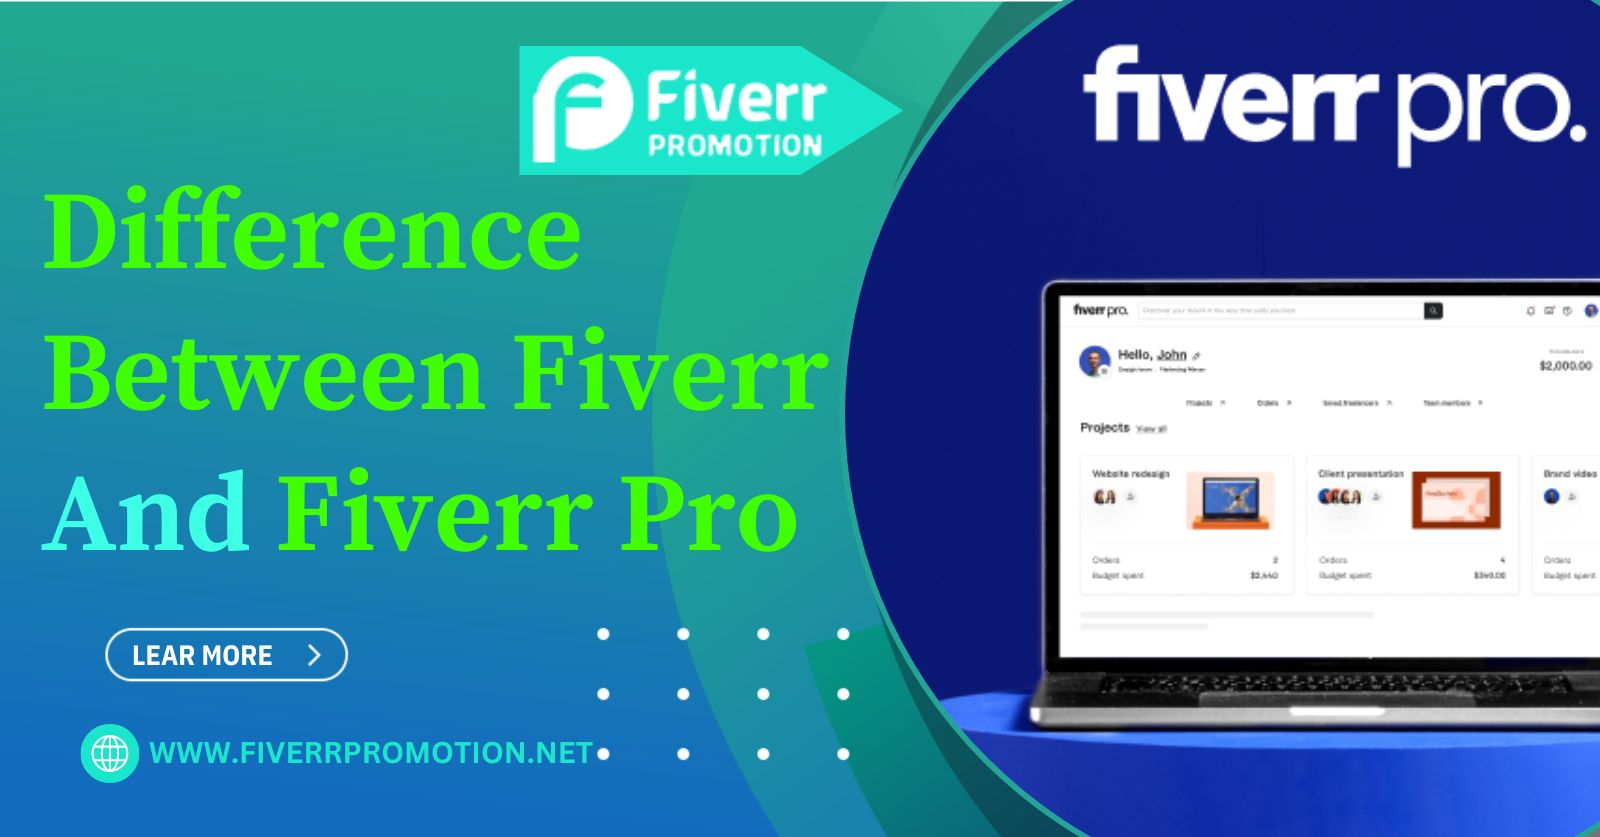 Difference Between Fiverr and Fiverr Pro